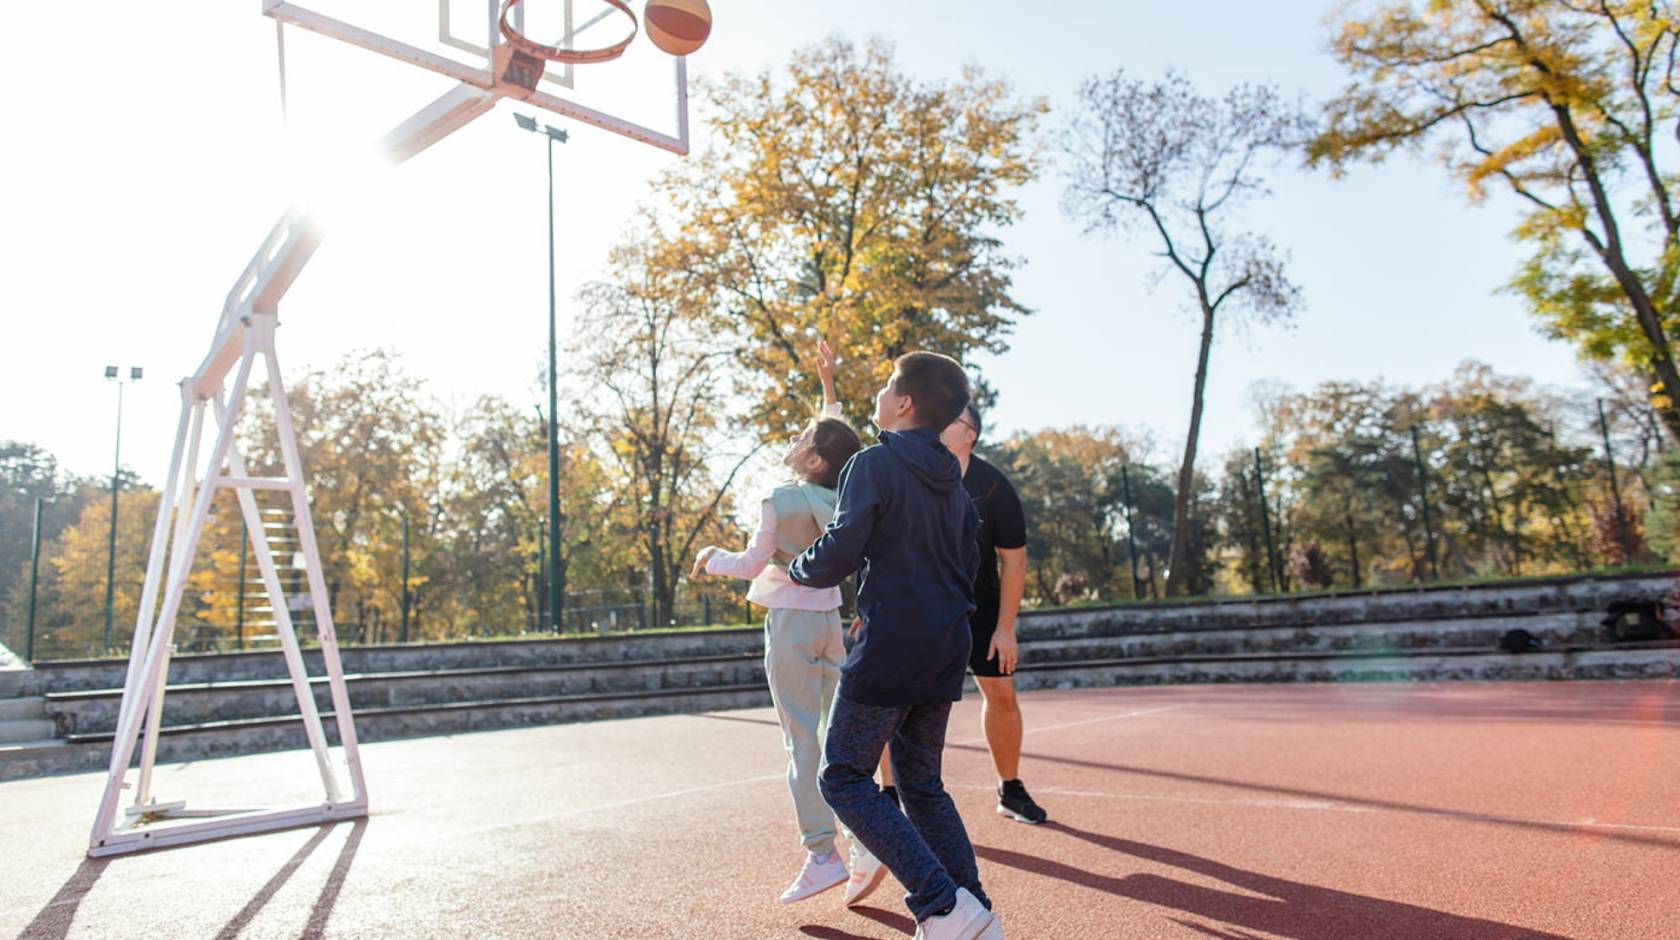 Two kids play outdoors on a basketball court with a parent